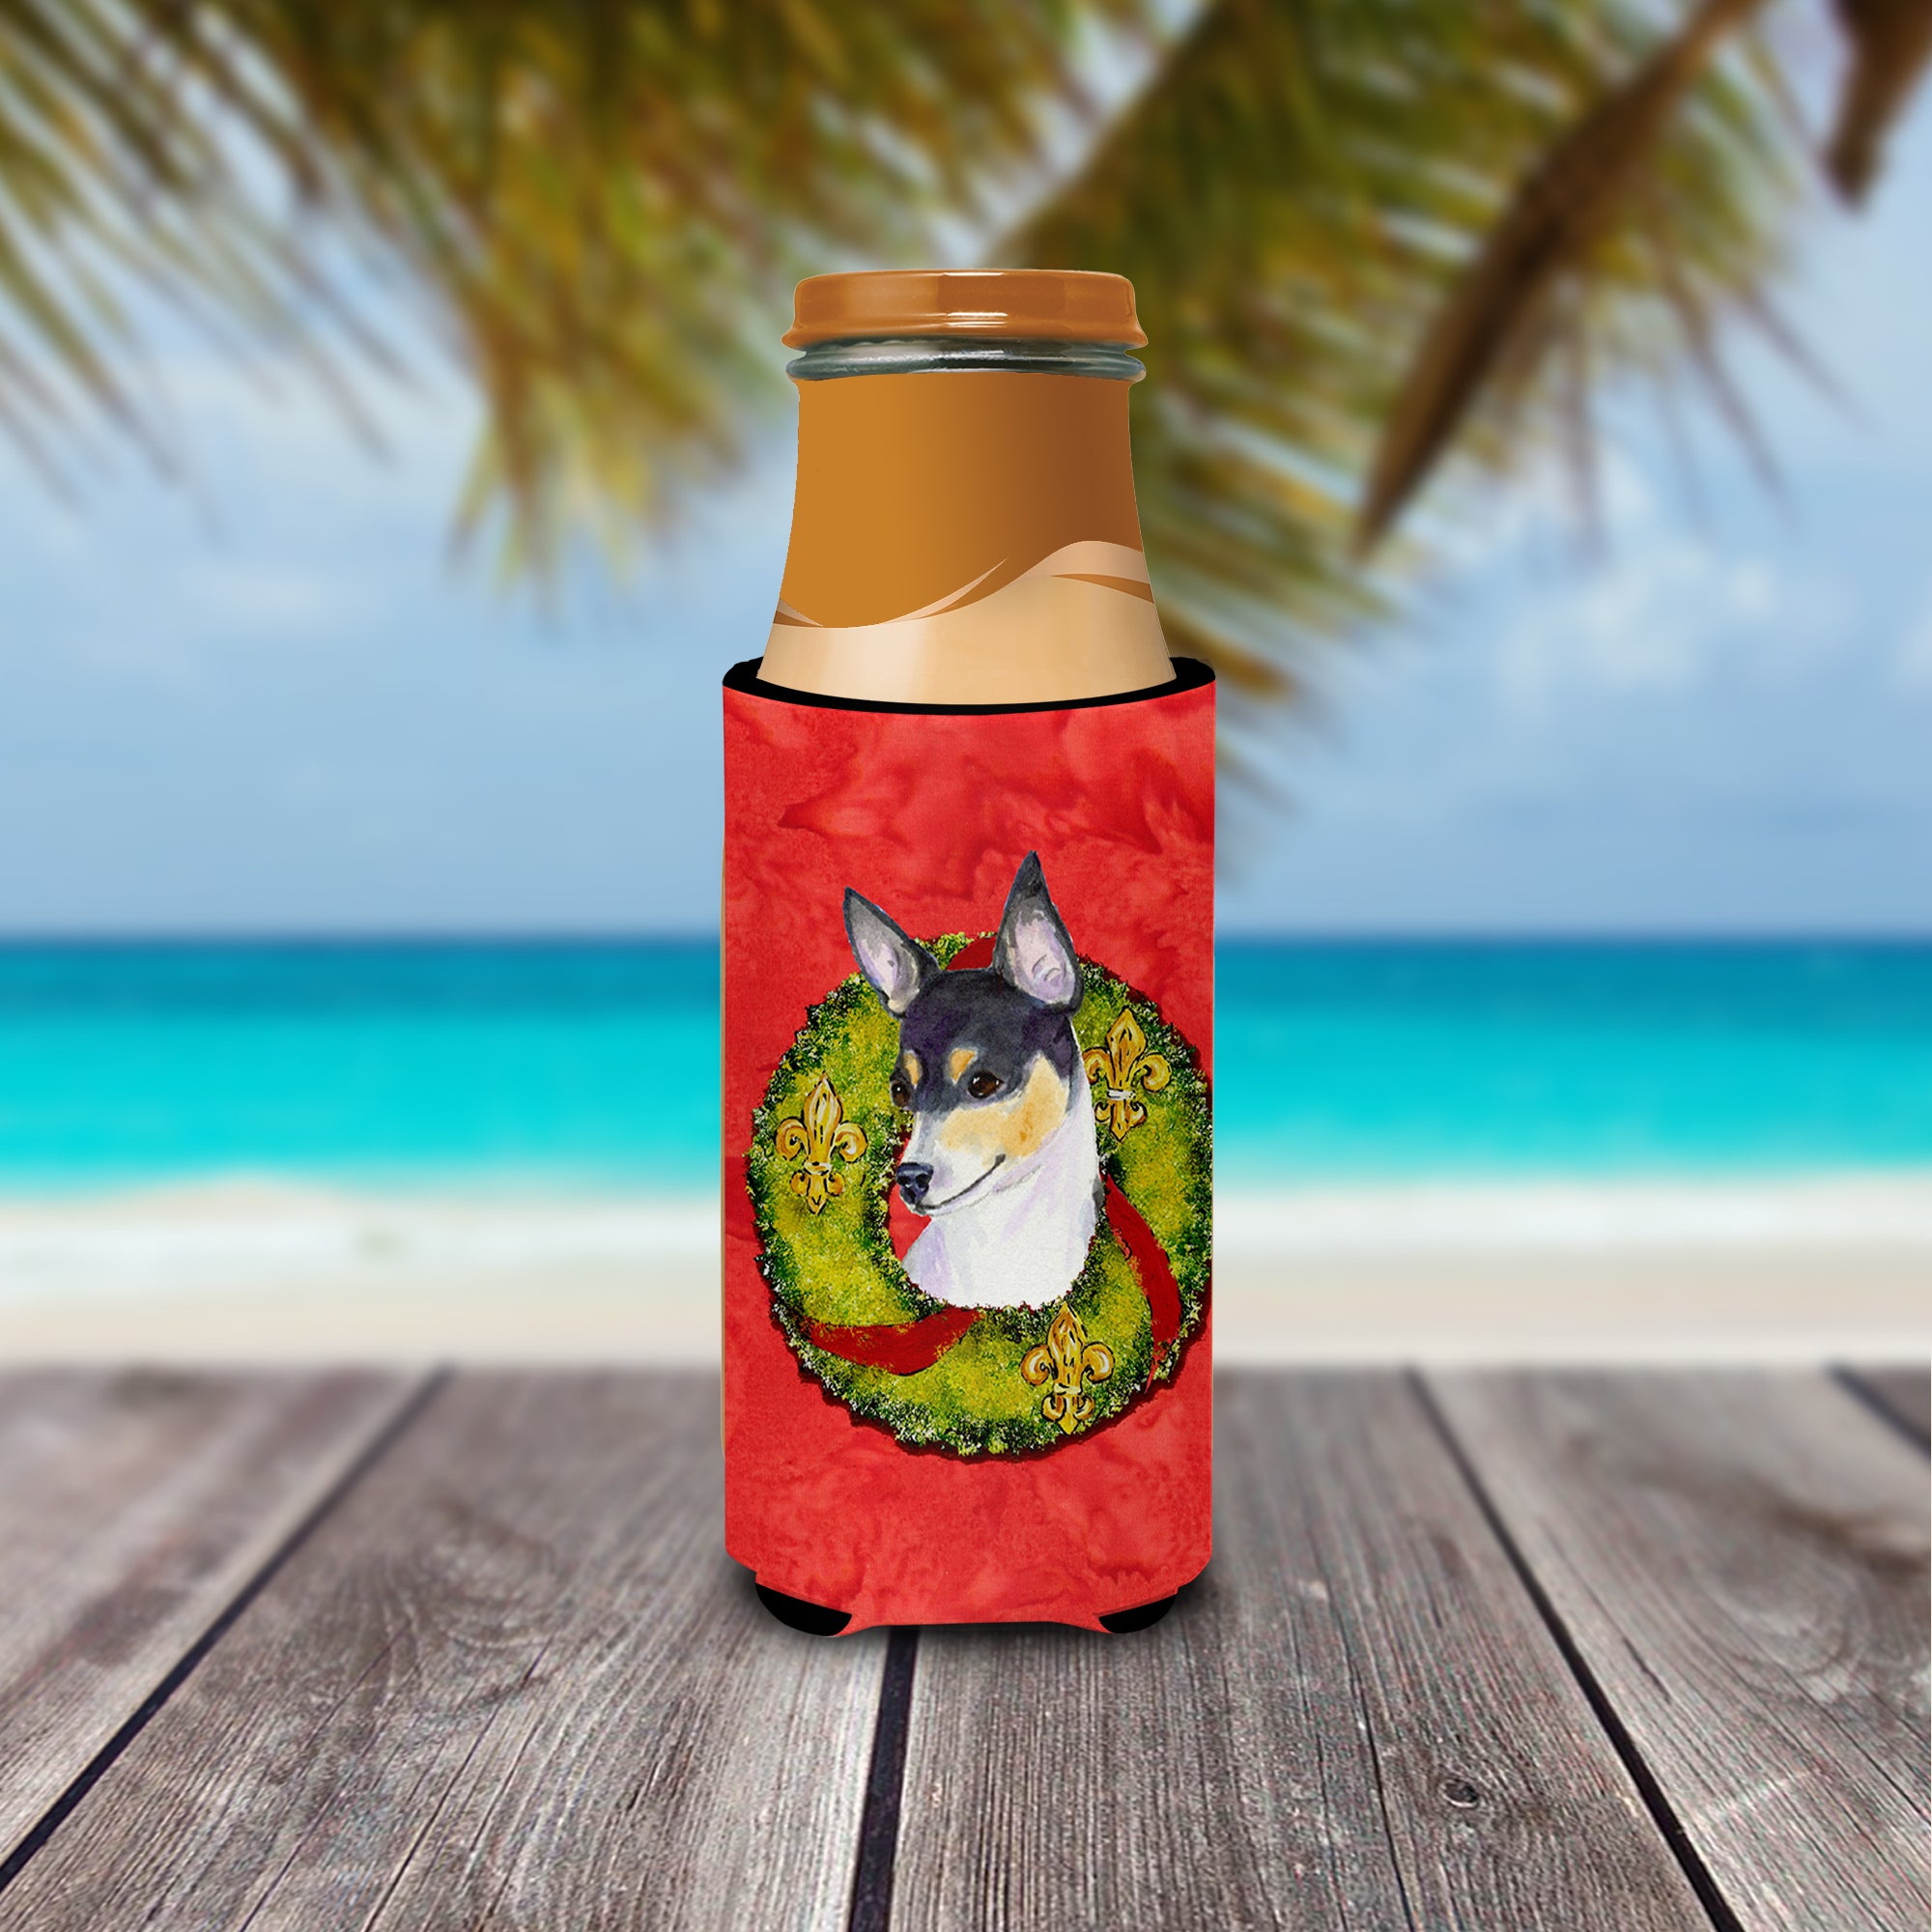 Fox Terrier Cristmas Wreath Ultra Beverage Insulators for slim cans SS4205MUK.